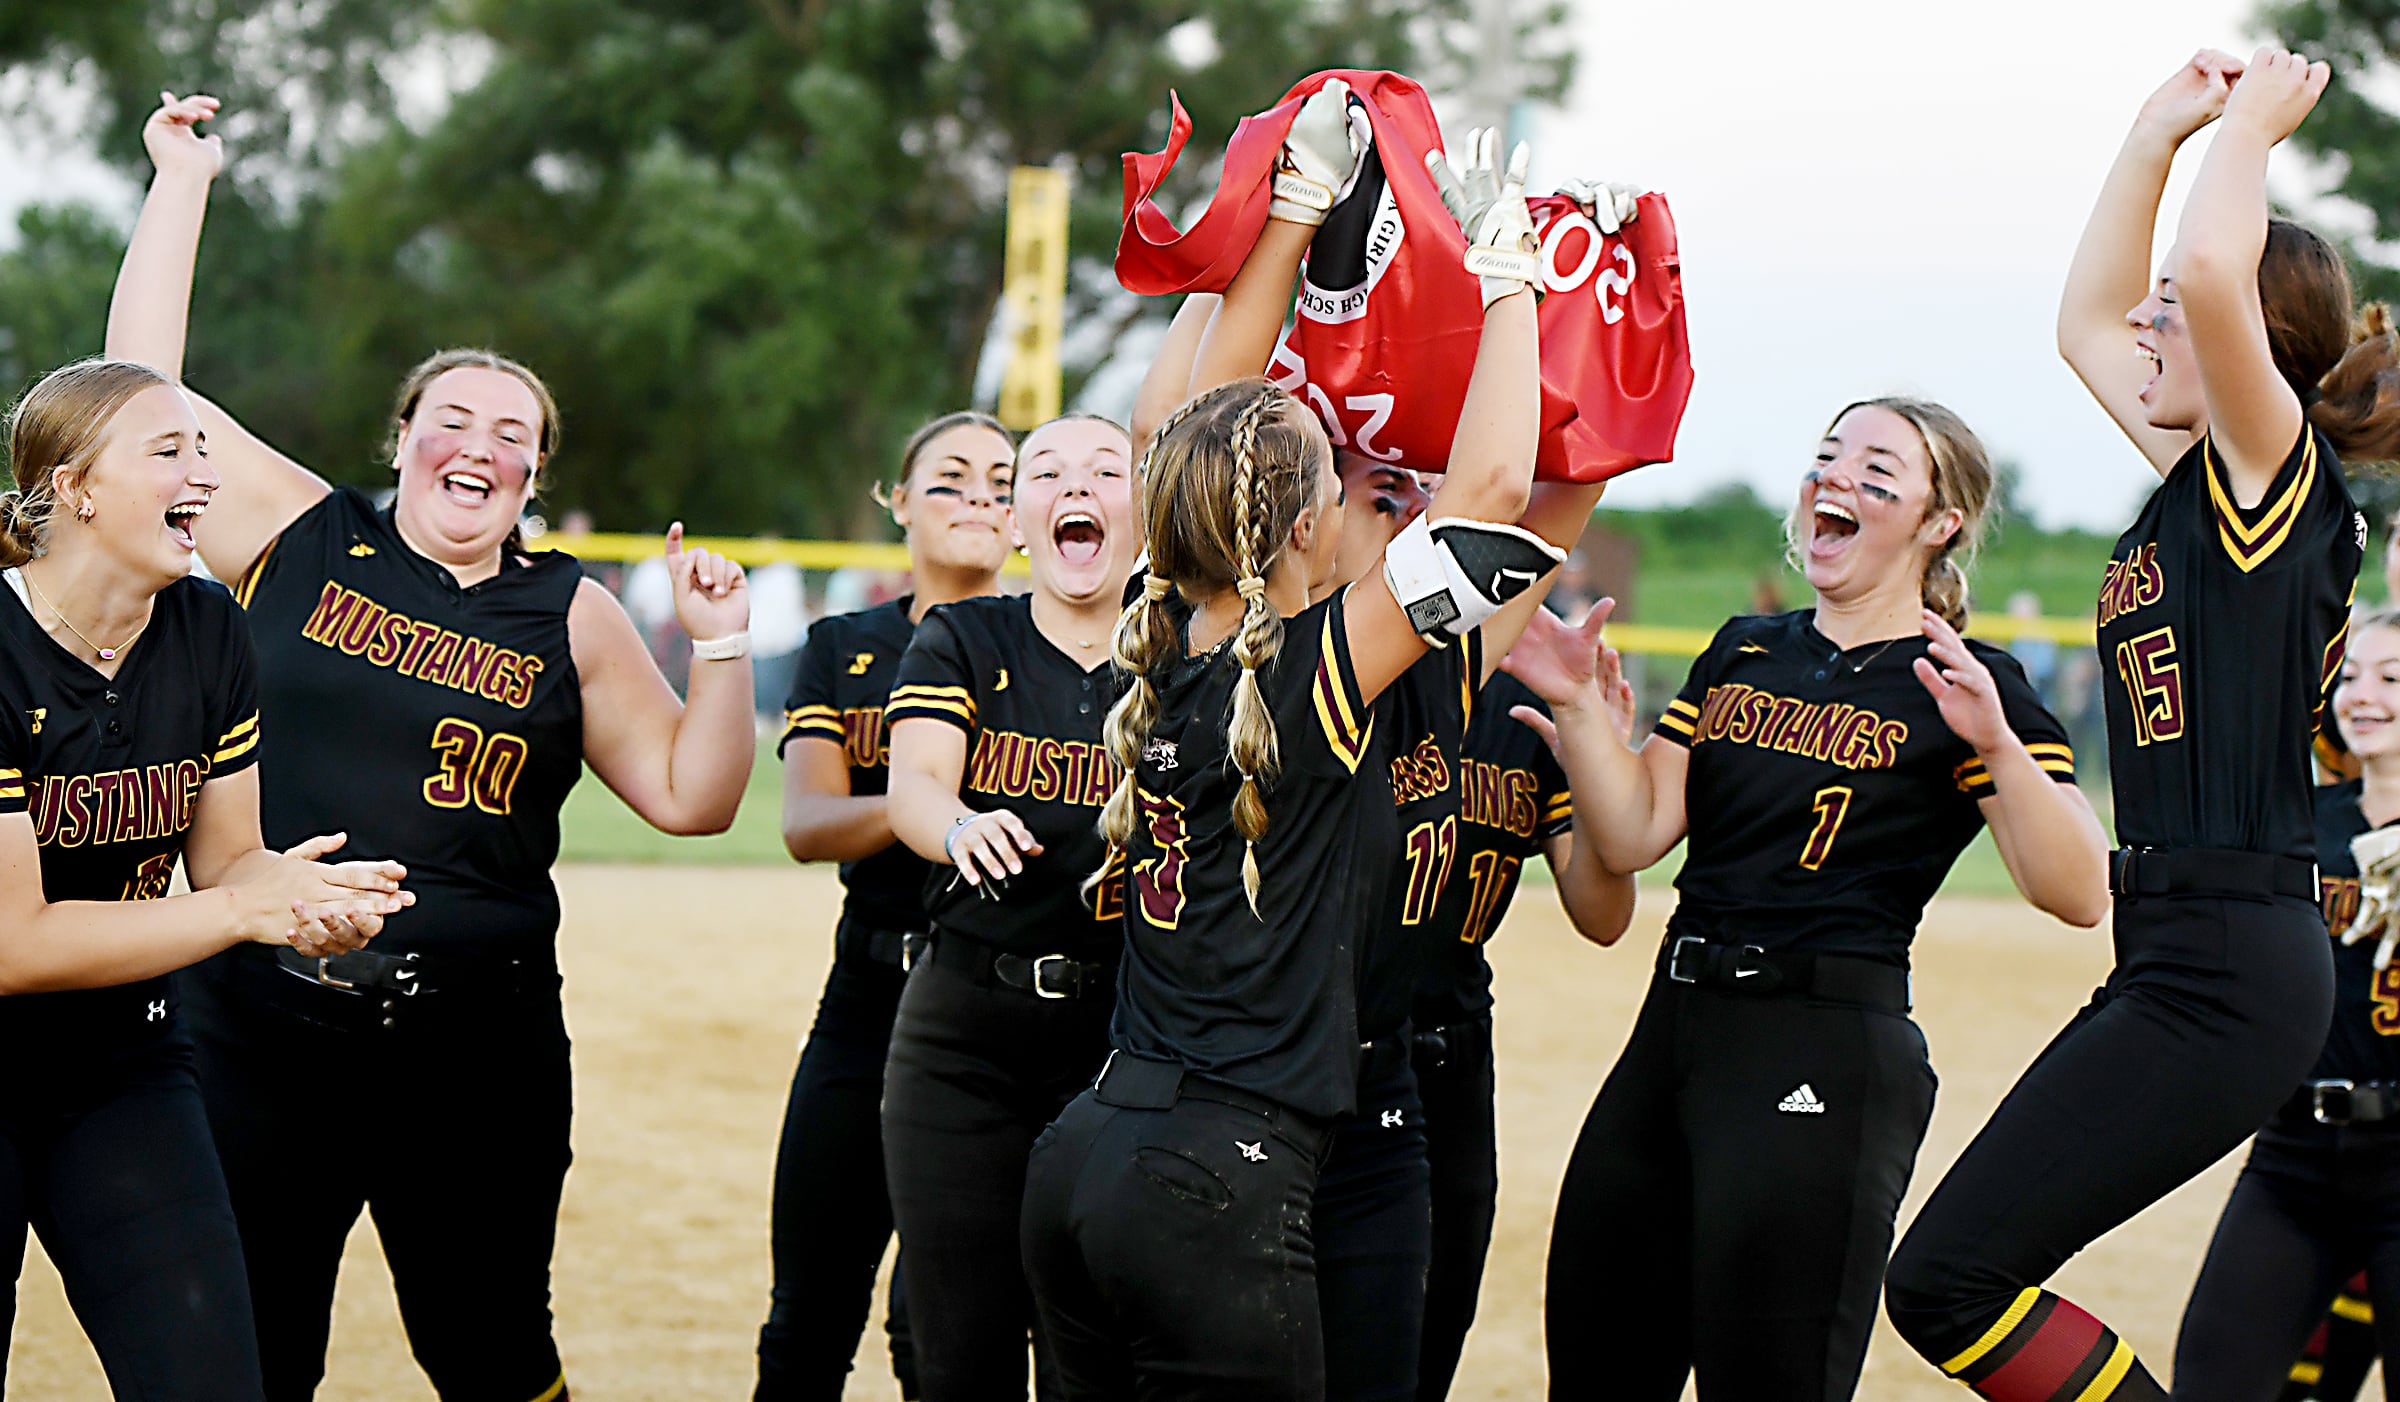 Mustang Muscle: PCM softball thumps Clarinda for first state berth